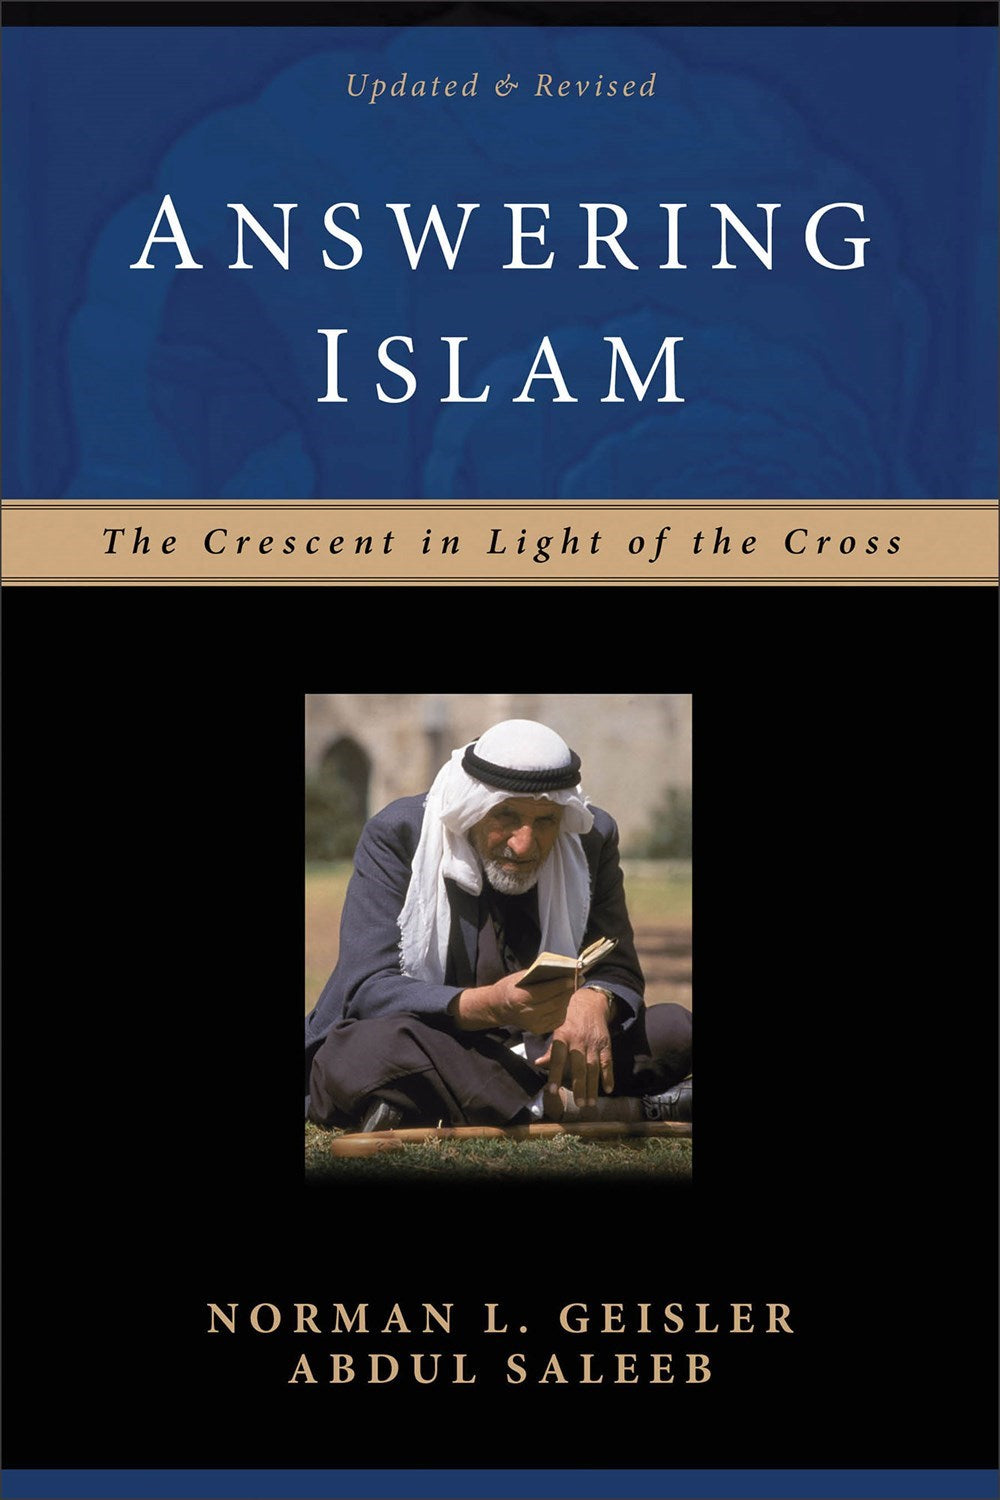 Answering Islam (2nd Edition)